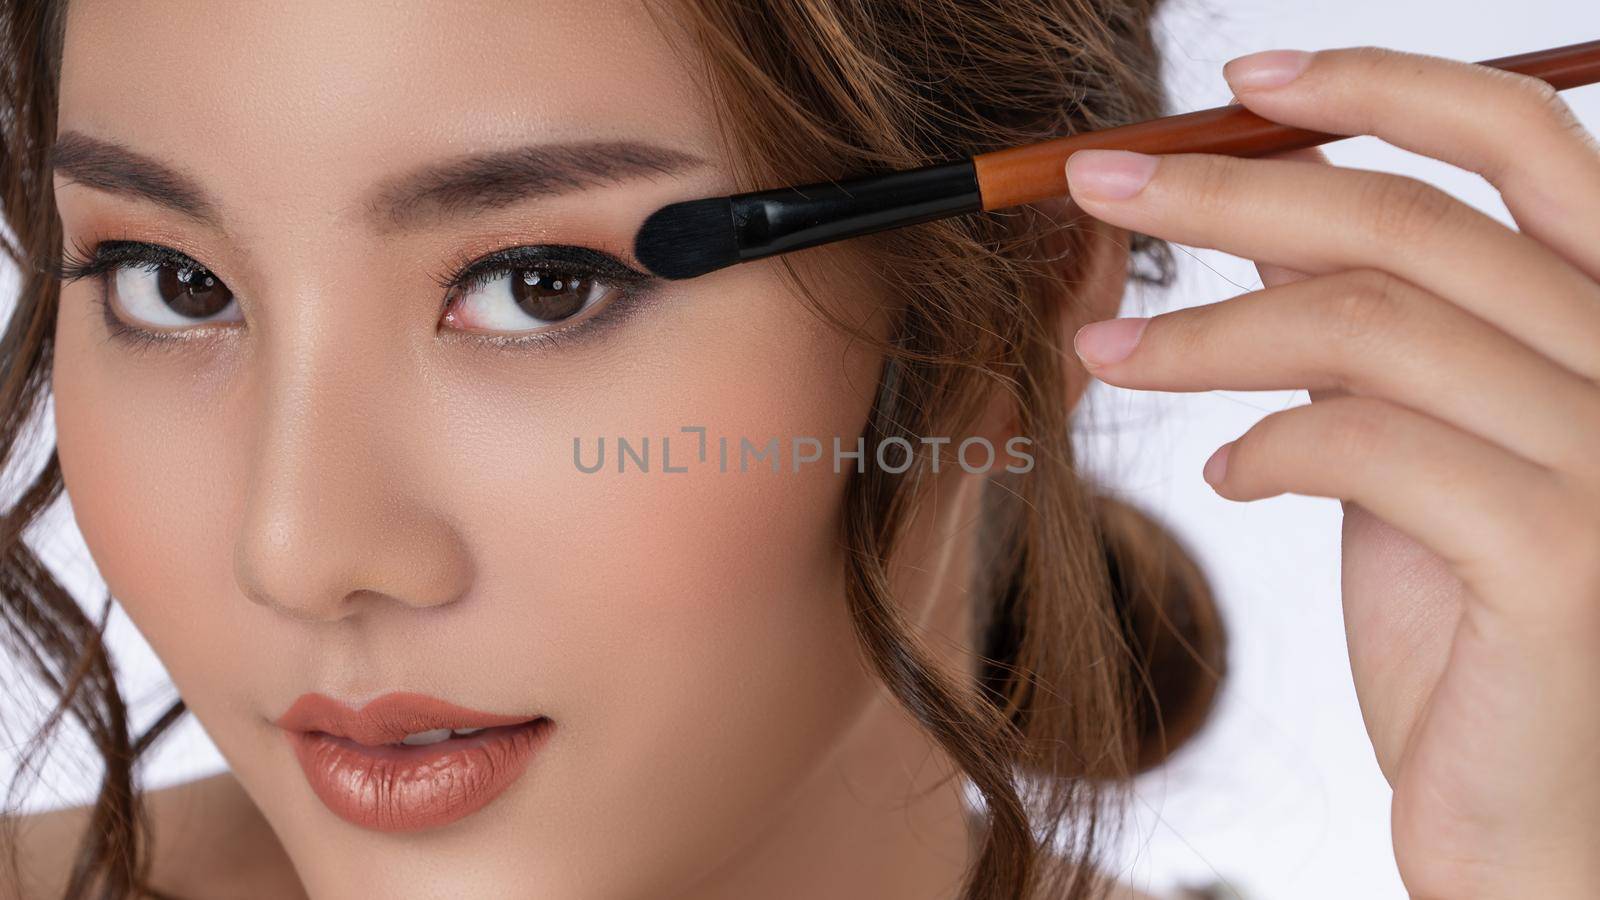 Closeup gorgeous young woman putting black mascara on her long eyelashes with brush. Beauty cosmetic concept. Female model with perfect skin.